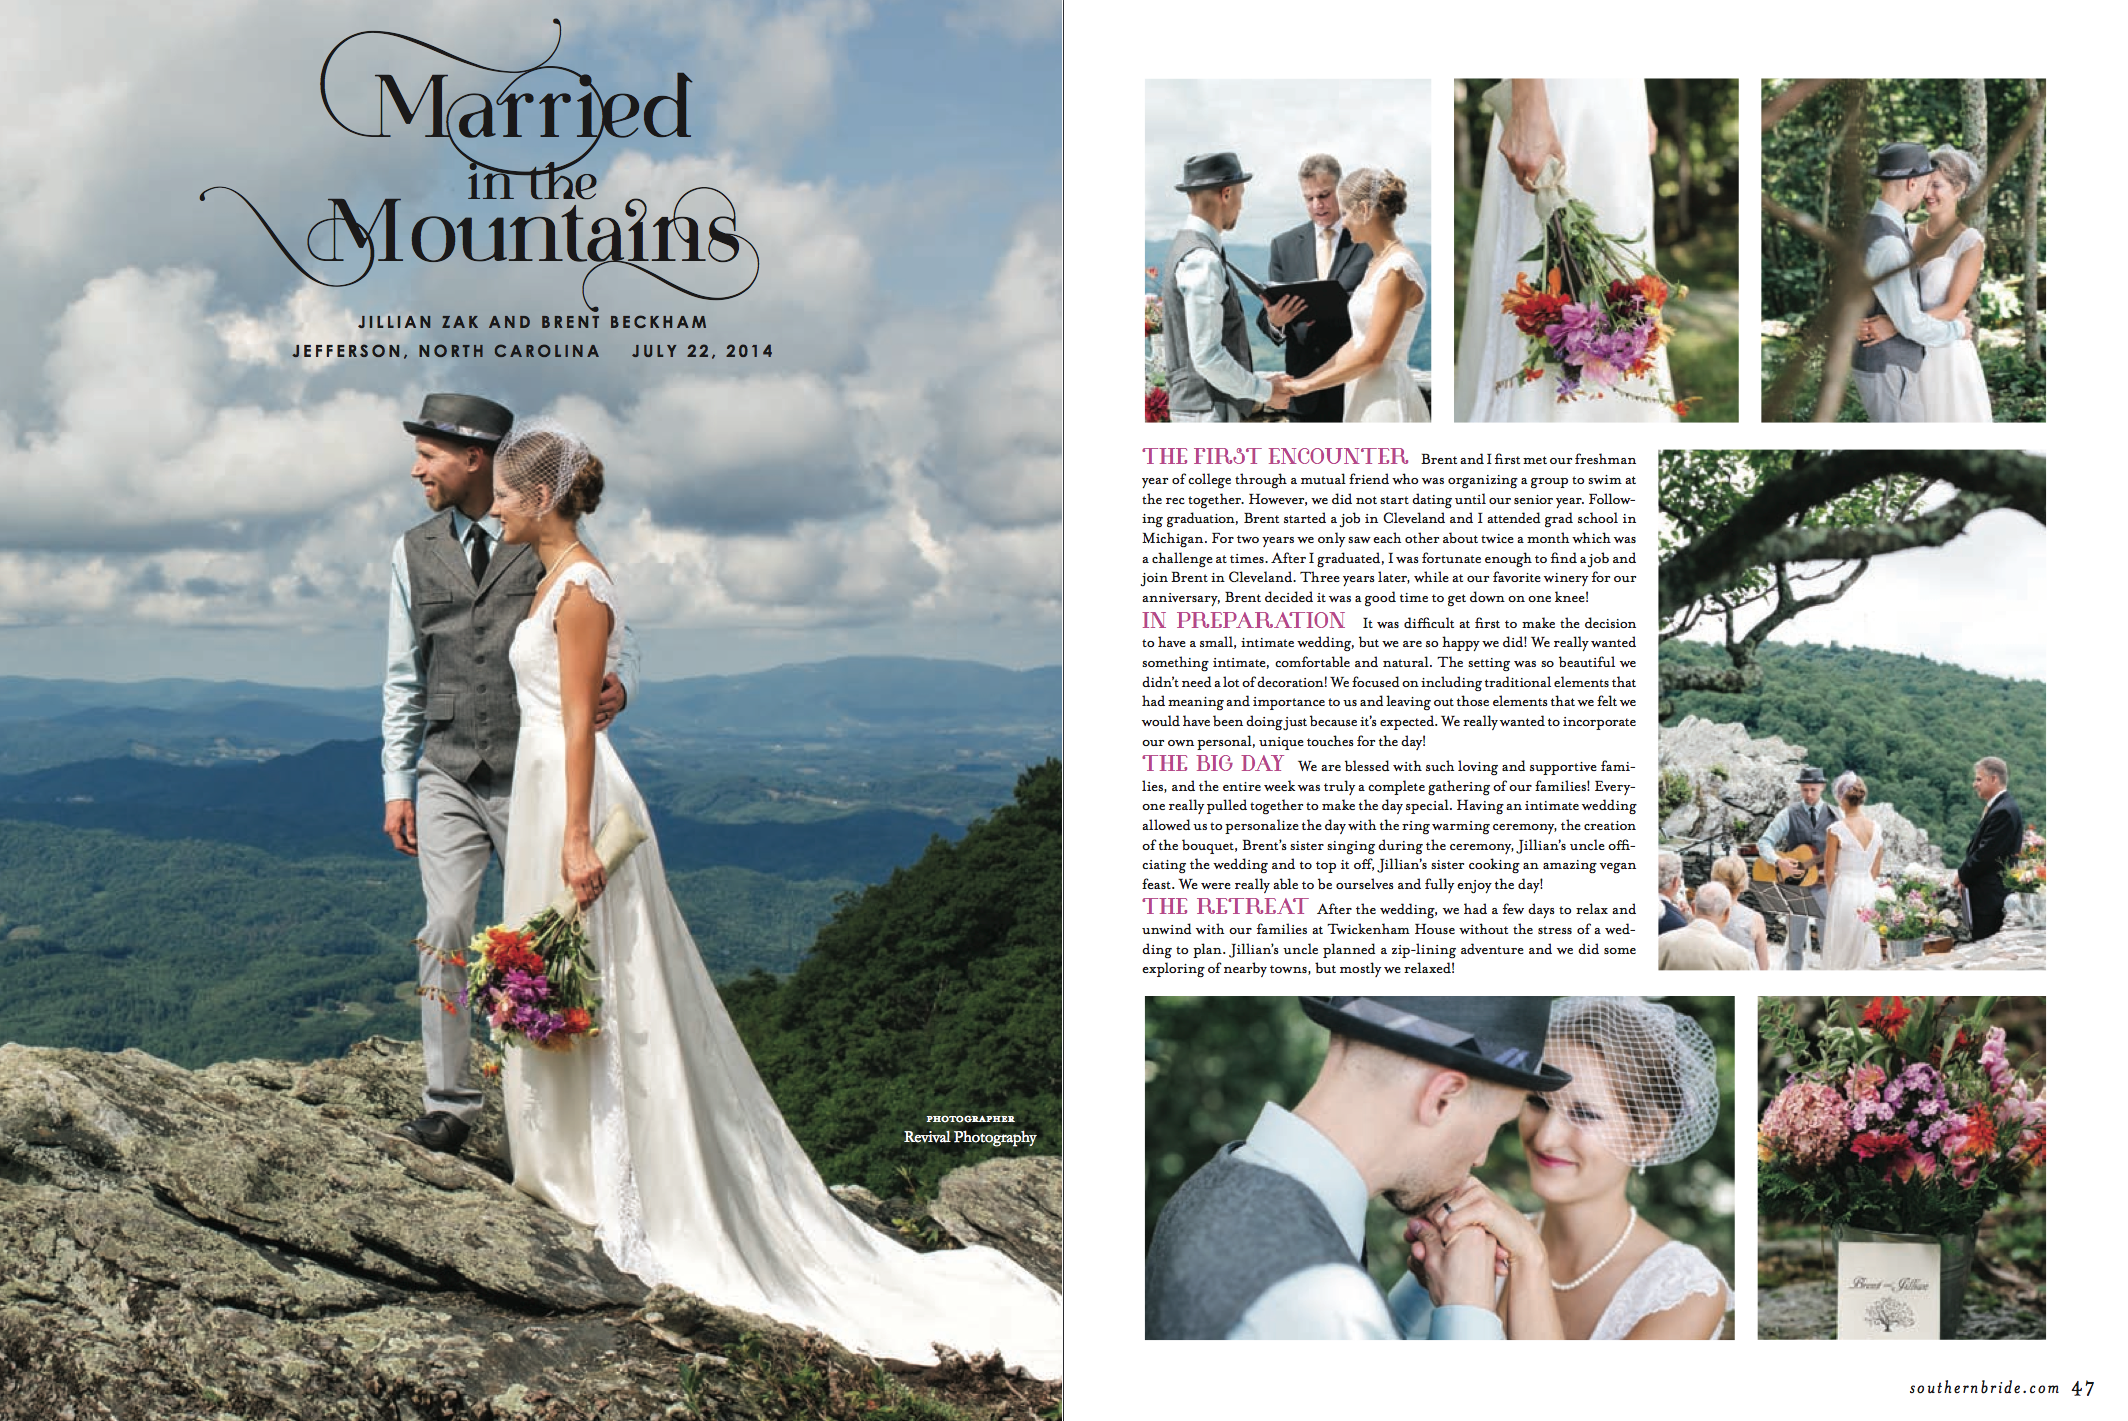 Revival Photography Featured in Southern Bride Magazine 2015 Winter-Spring Issue www.revivalphotography.com